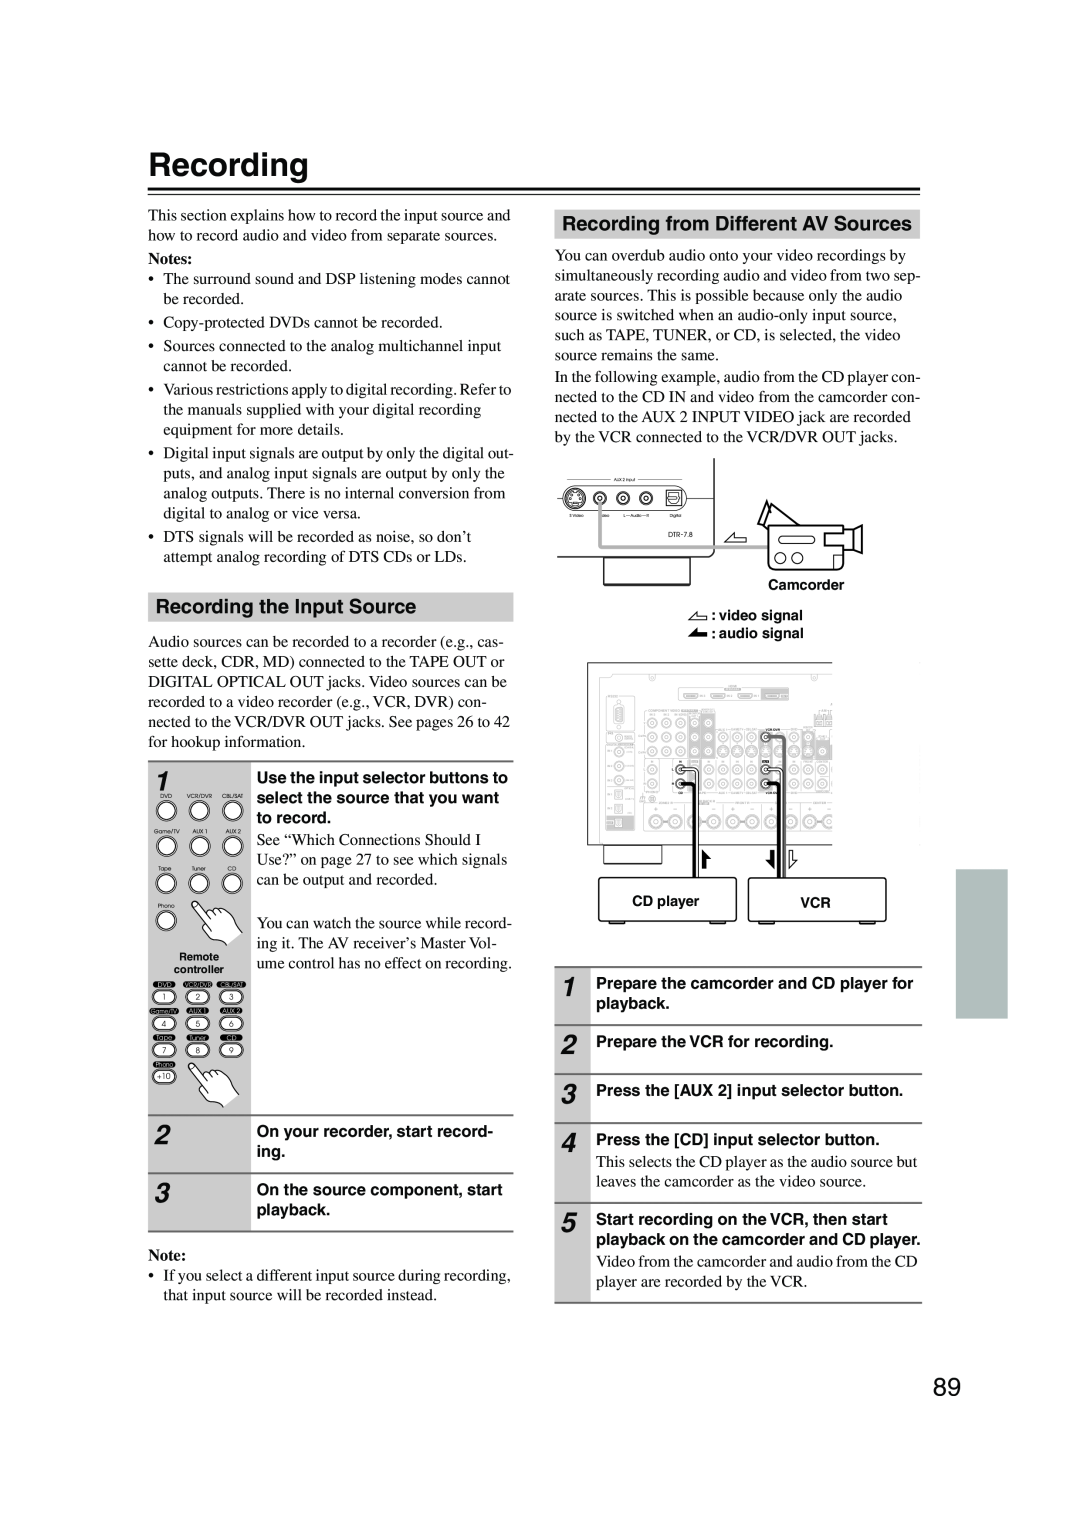 Integra DTR-7.8 instruction manual Recording the Input Source, Recording from Different AV Sources, Notes 